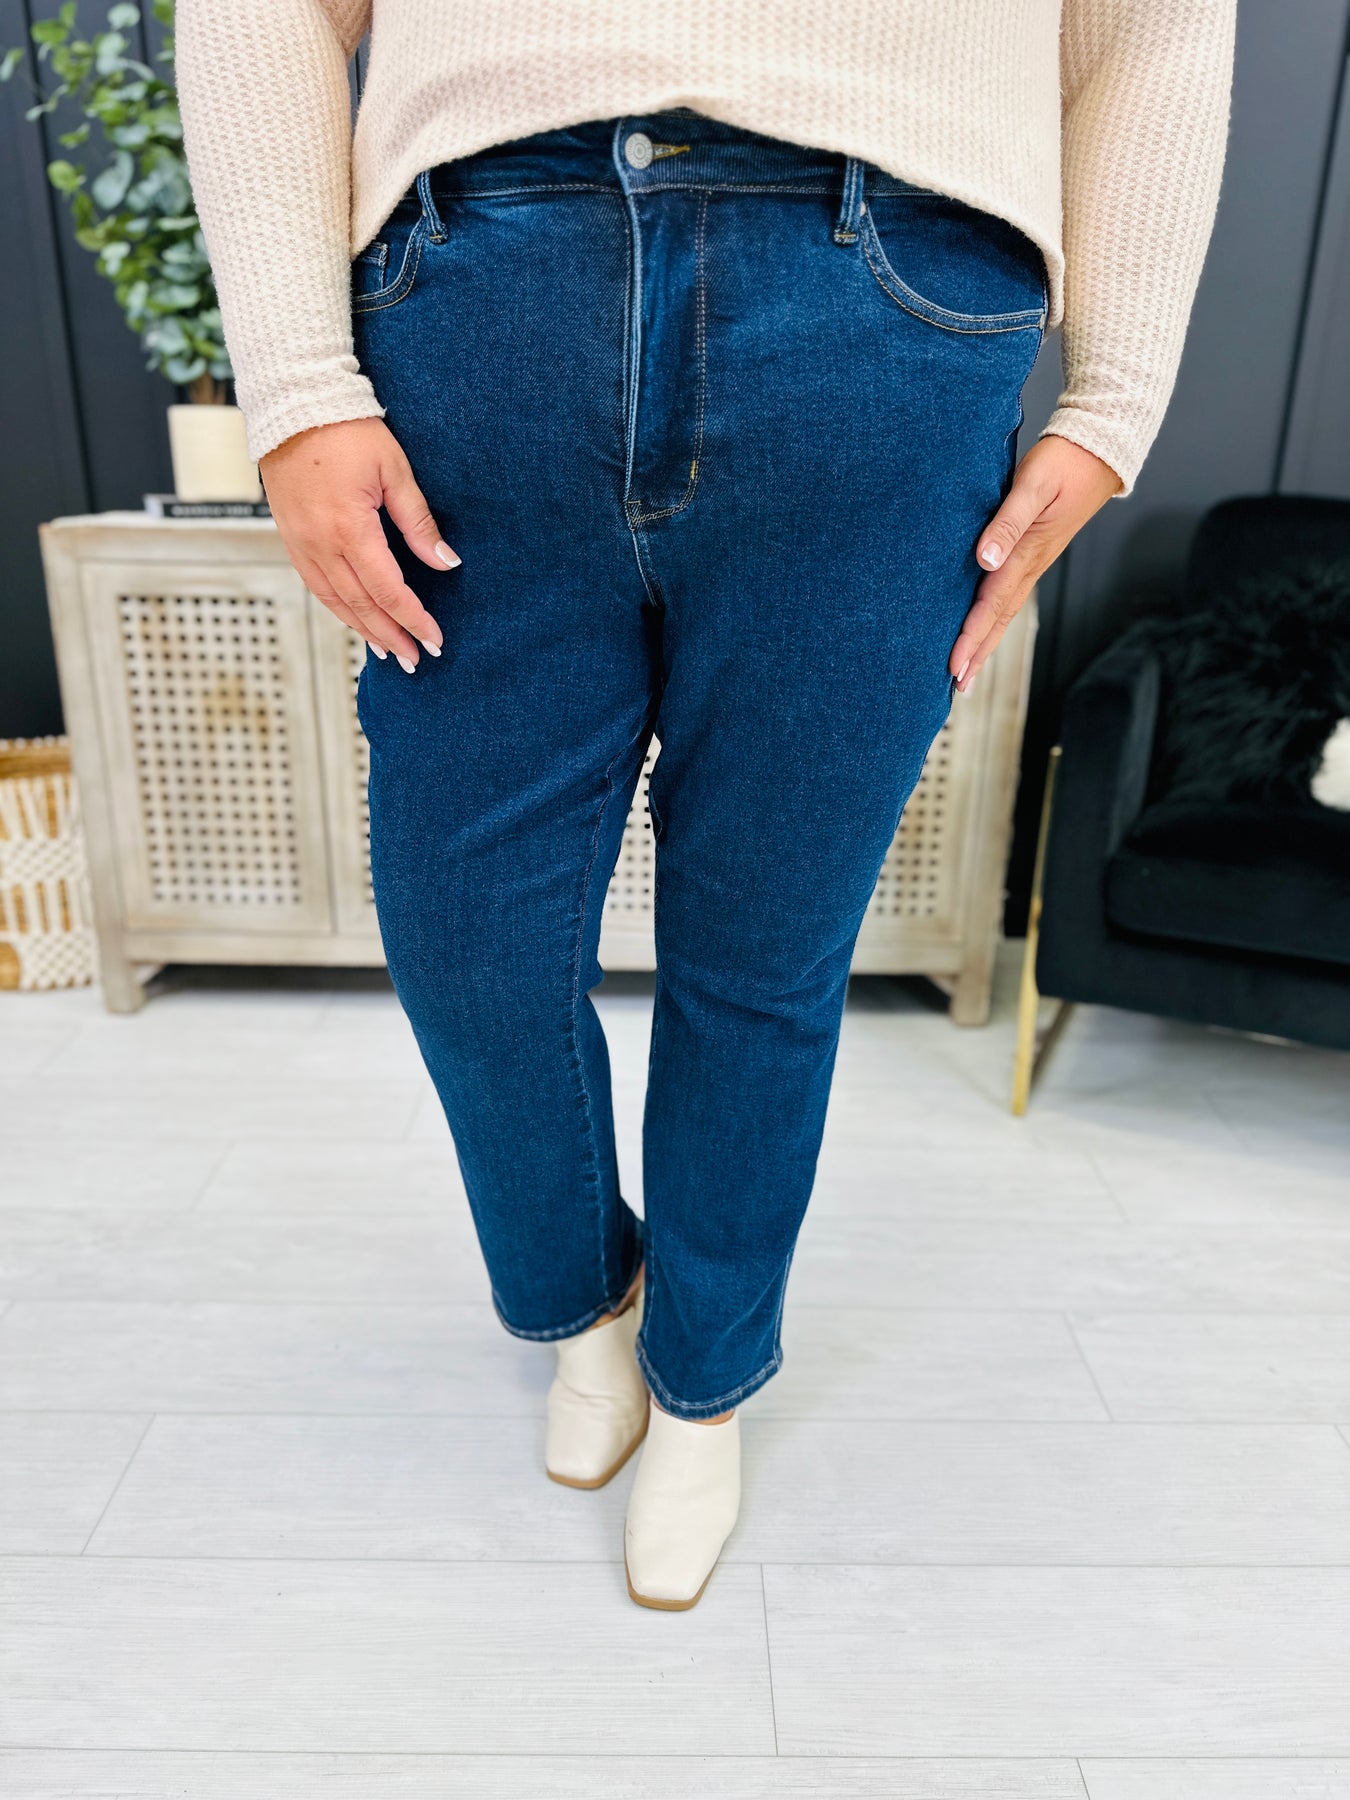 We love TUMMY CONTROL TECHNOLOGY! These new Judy Blues are truly